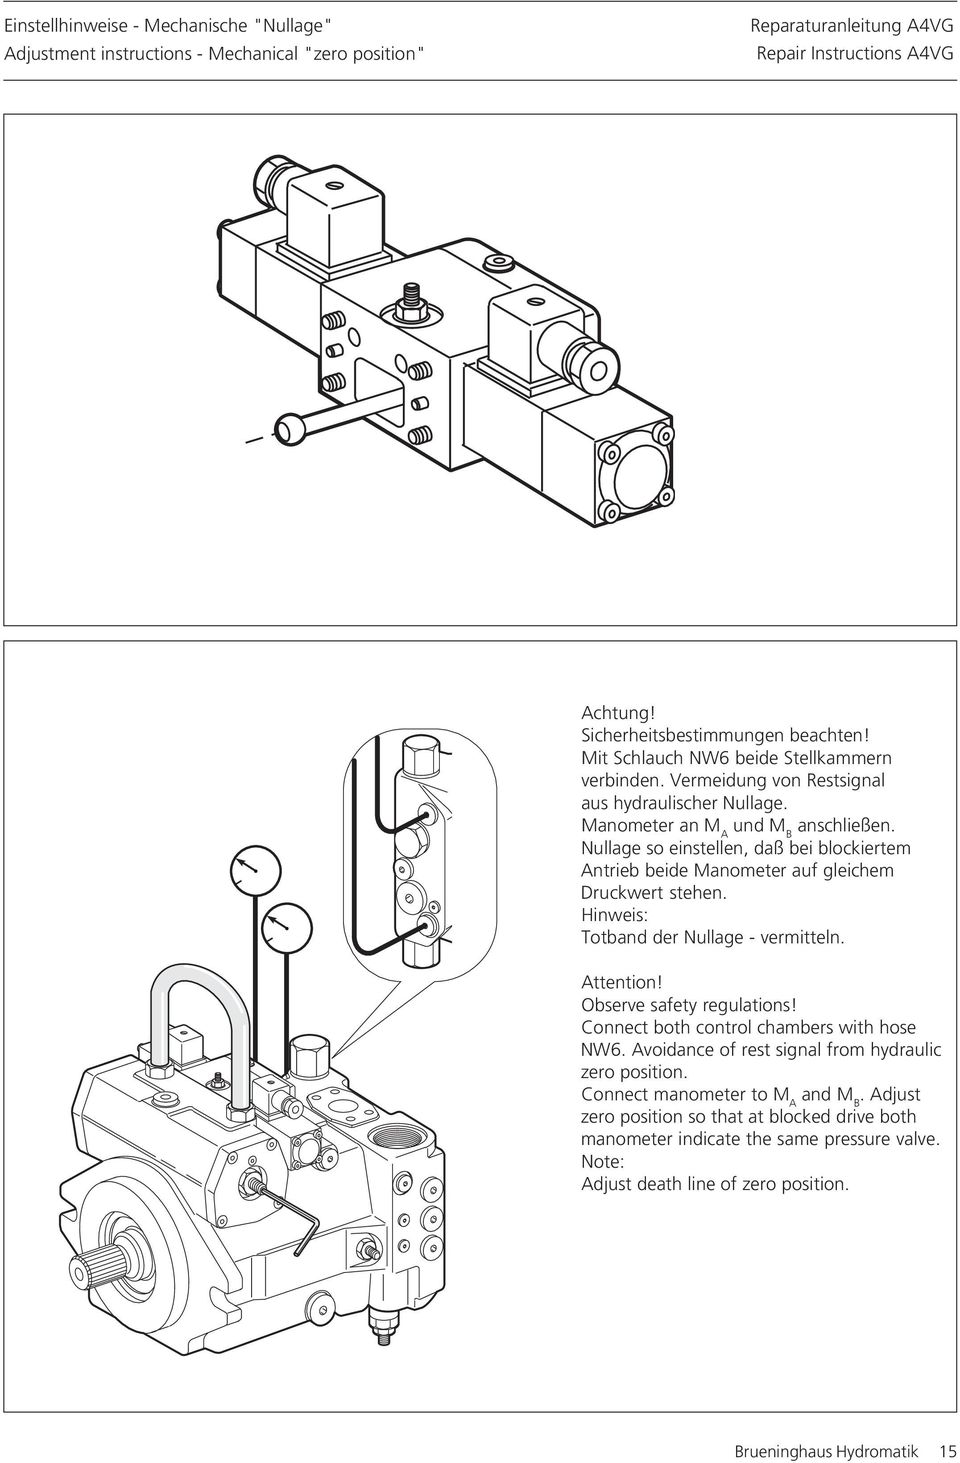 Hinweis: Totband der Nullage - vermitteln. Attention! Observe safety regulations! Connect both control chambers with hose NW6. Avoidance of rest signal from hydraulic zero position.